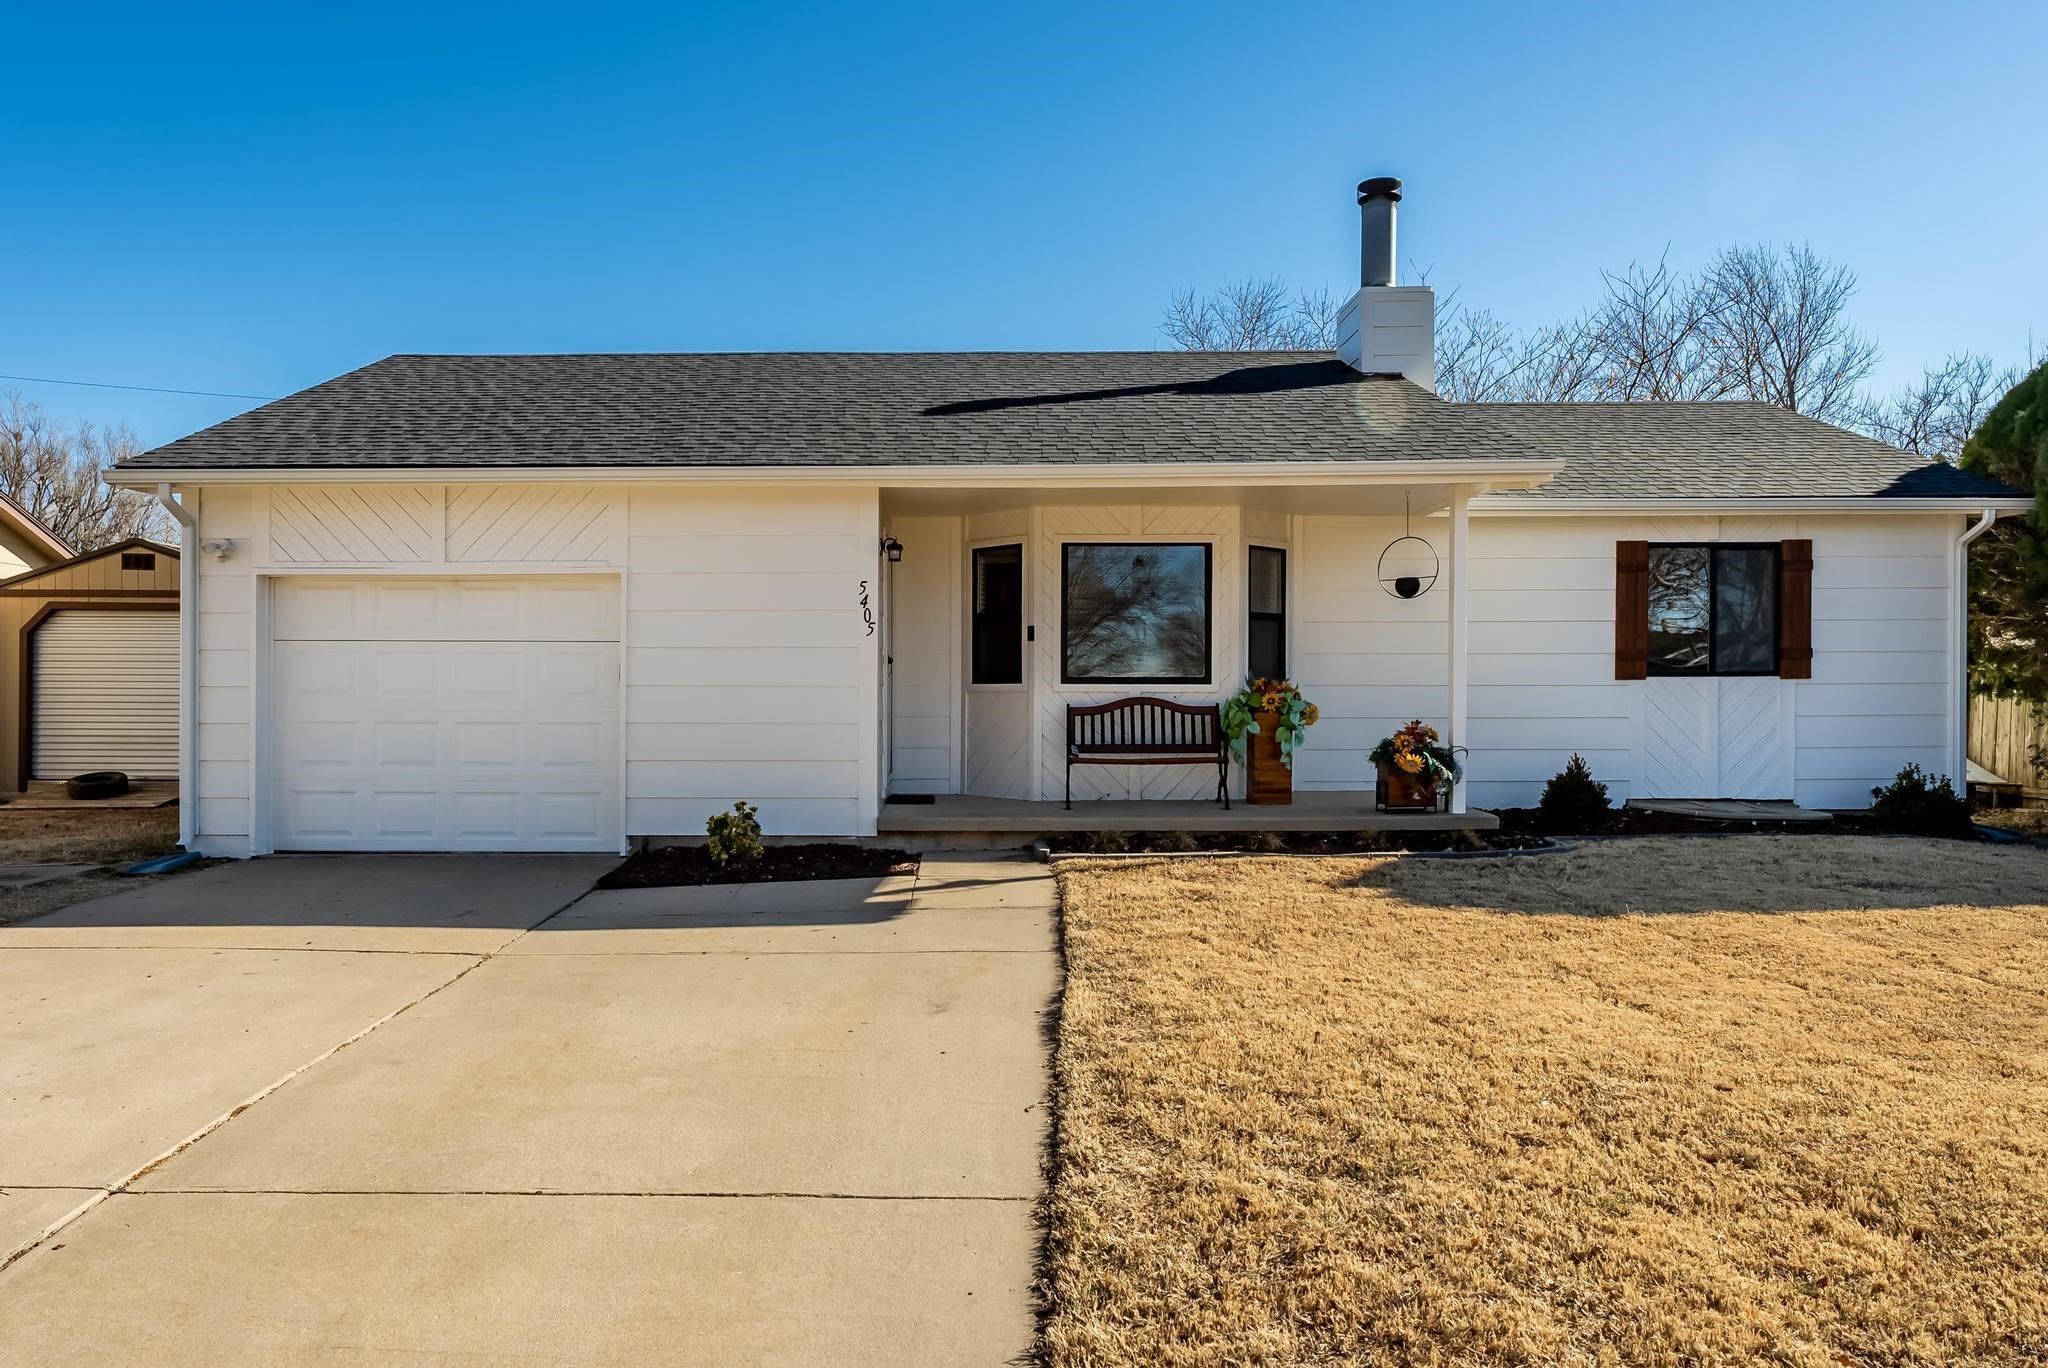 Beautiful home in West Wichita featuring 3 bedrooms and 2 baths.  Seller has recently installed new 